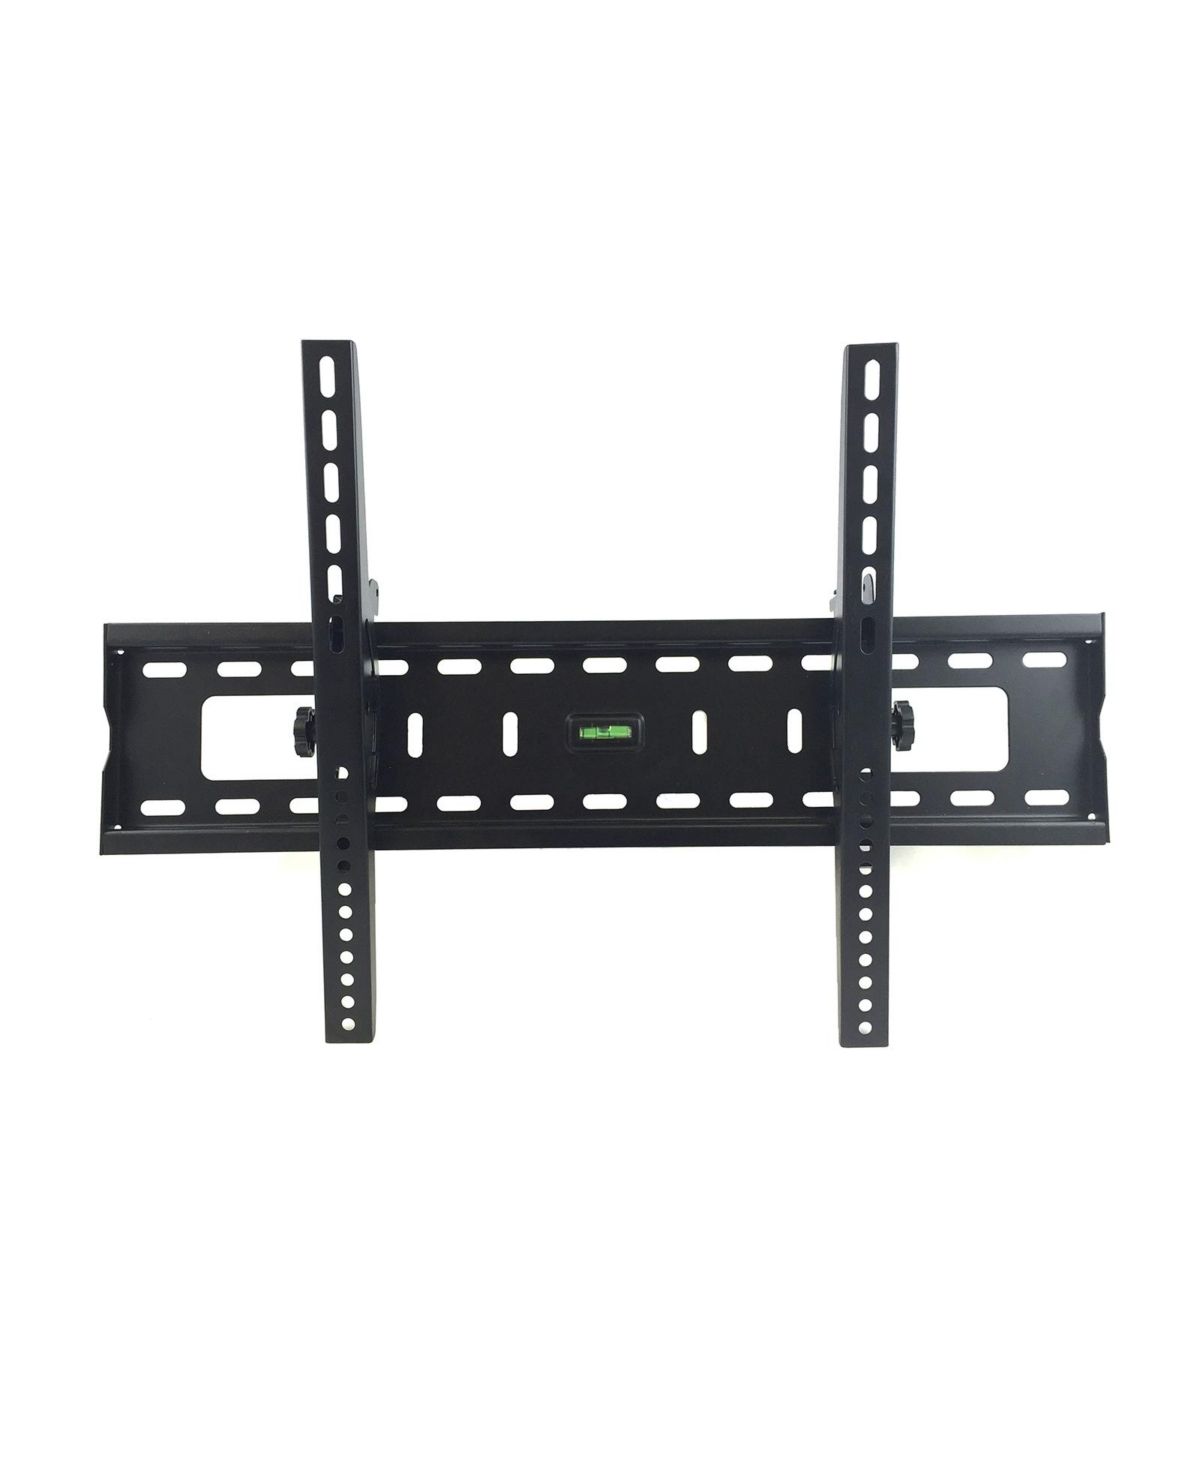 Tilt Television Wall Mount 32-70 Inch Led, Lcd and Plasma Screens - Black